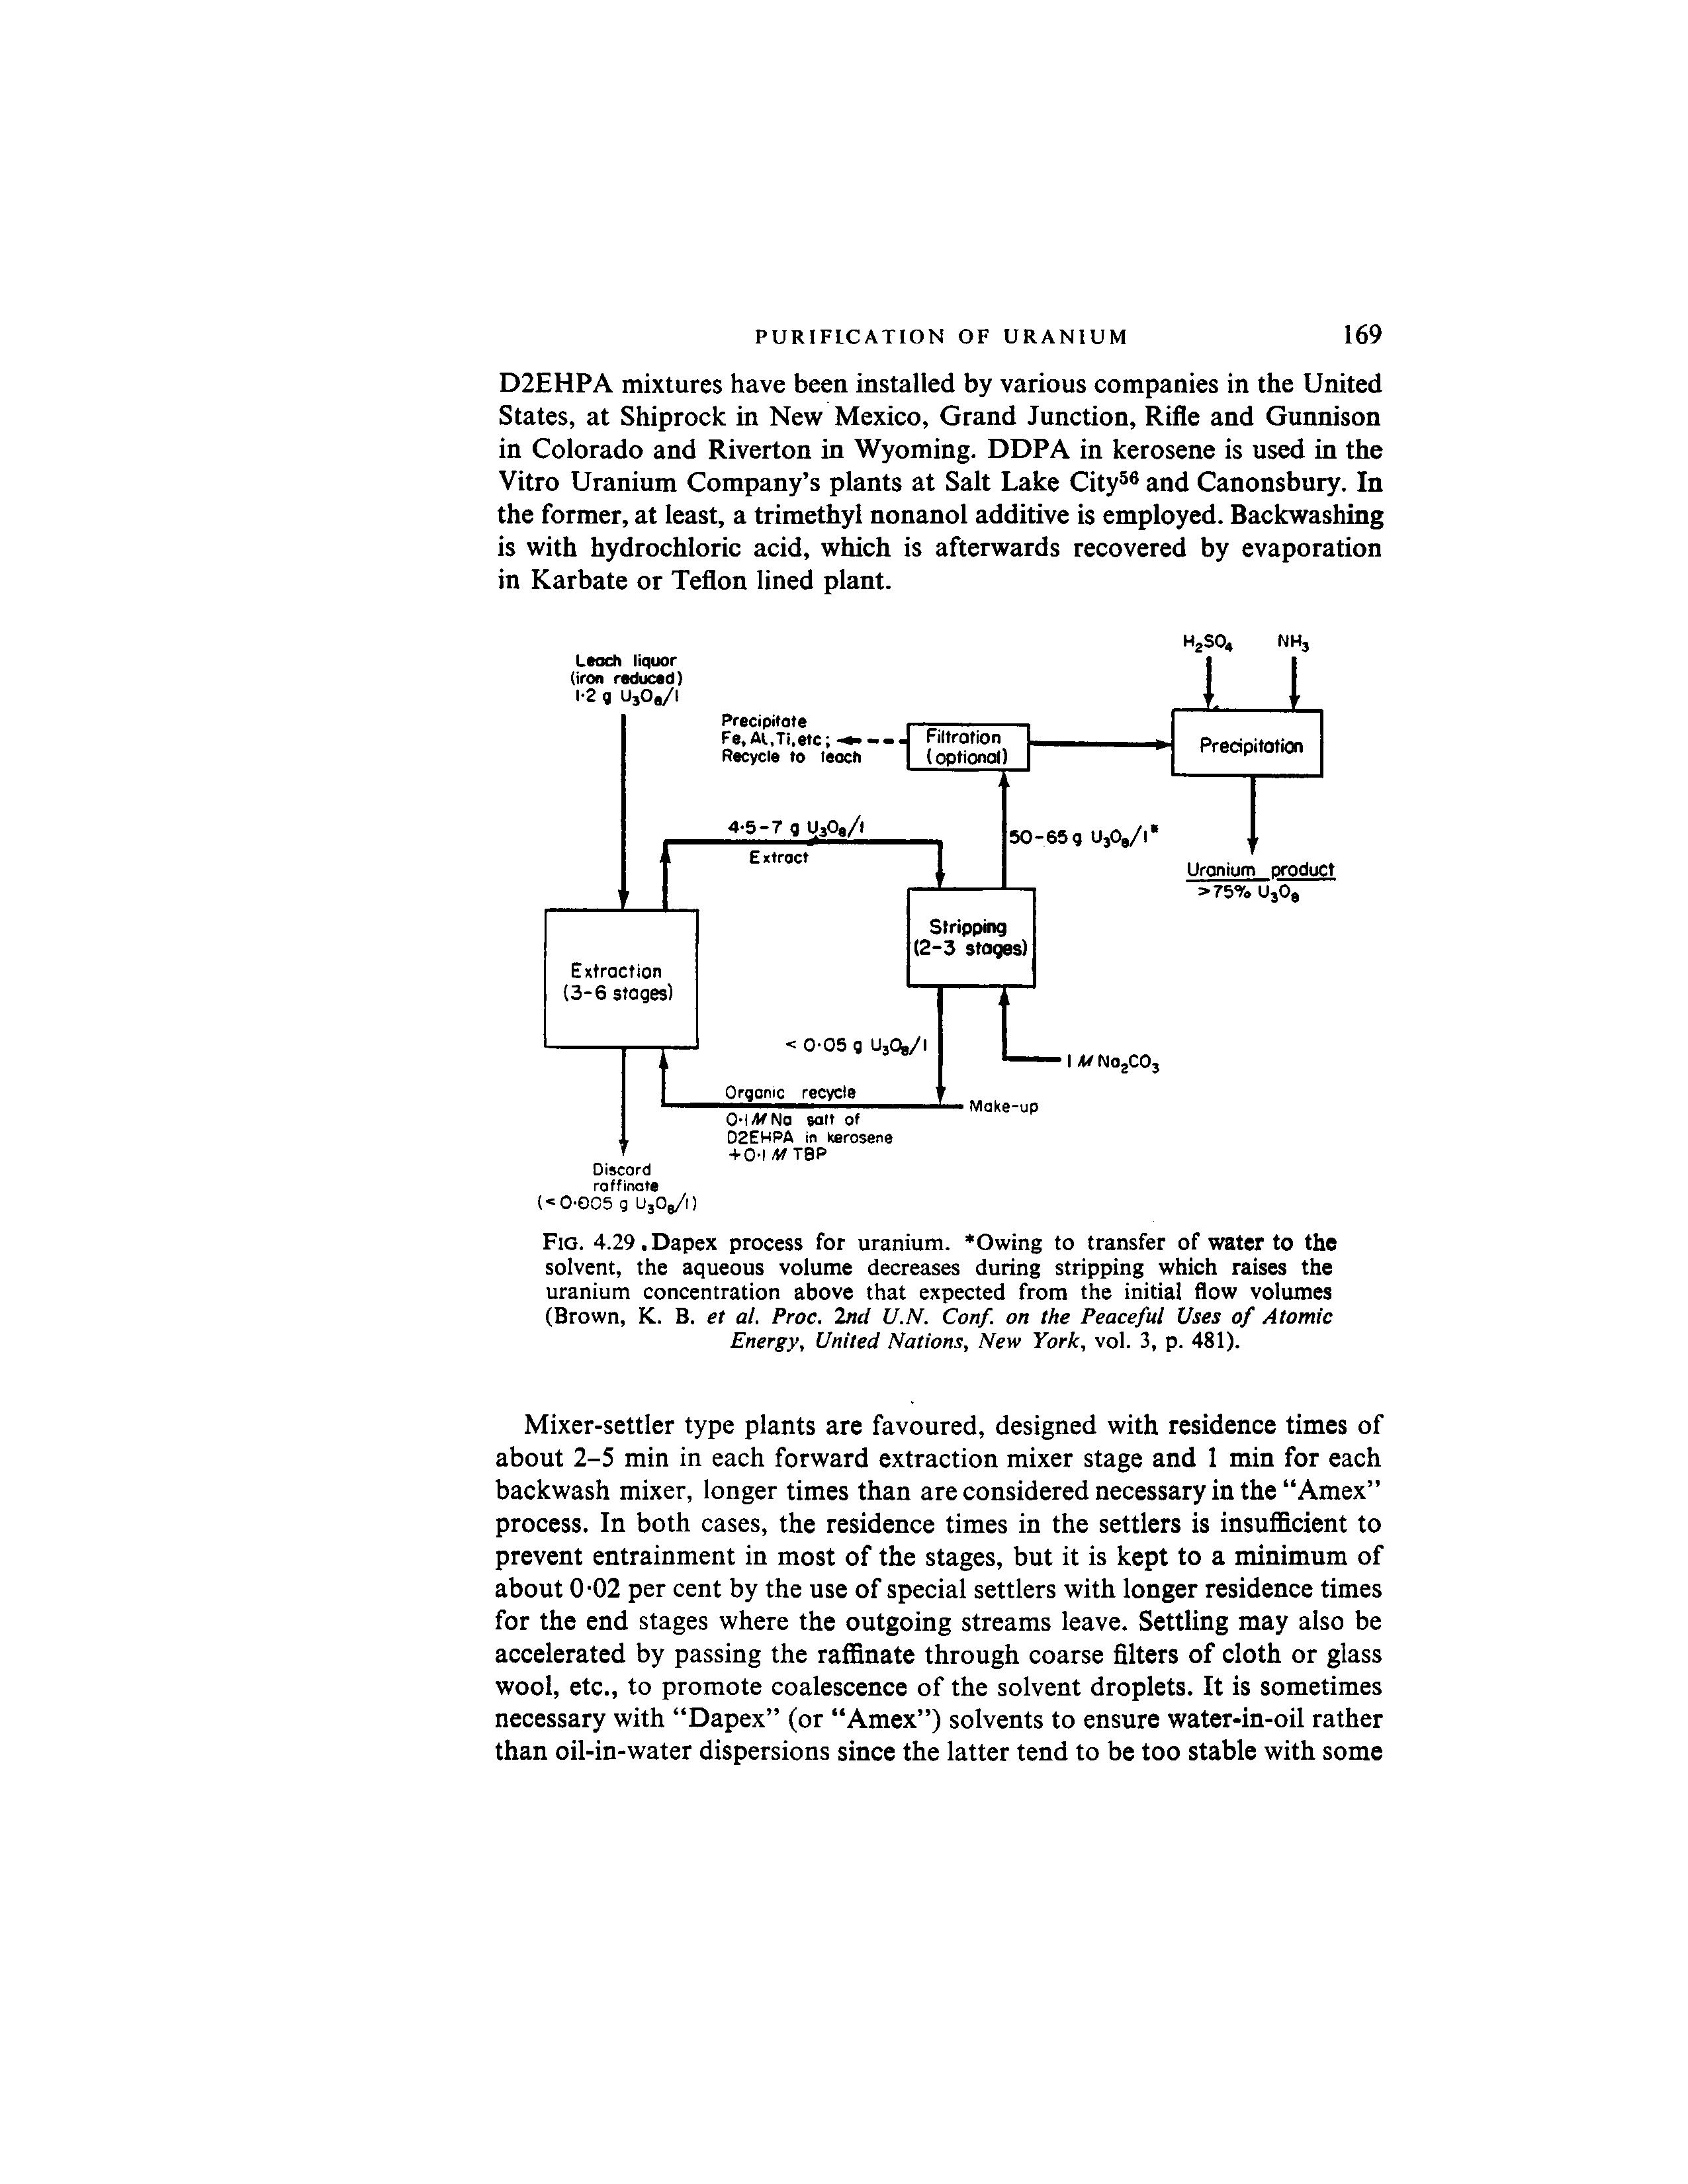 Fig. 4.29.Dapex process for uranium. Owing to transfer of water to the solvent, the aqueous volume decreases during stripping which raises the uranium concentration above that expected from the initial flow volumes (Brown, K. B. et al. Proc. 2nd U.N. Conf. on the Peaceful Uses of Atomic Energy, United Nations, New York, vol. 3, p. 481).